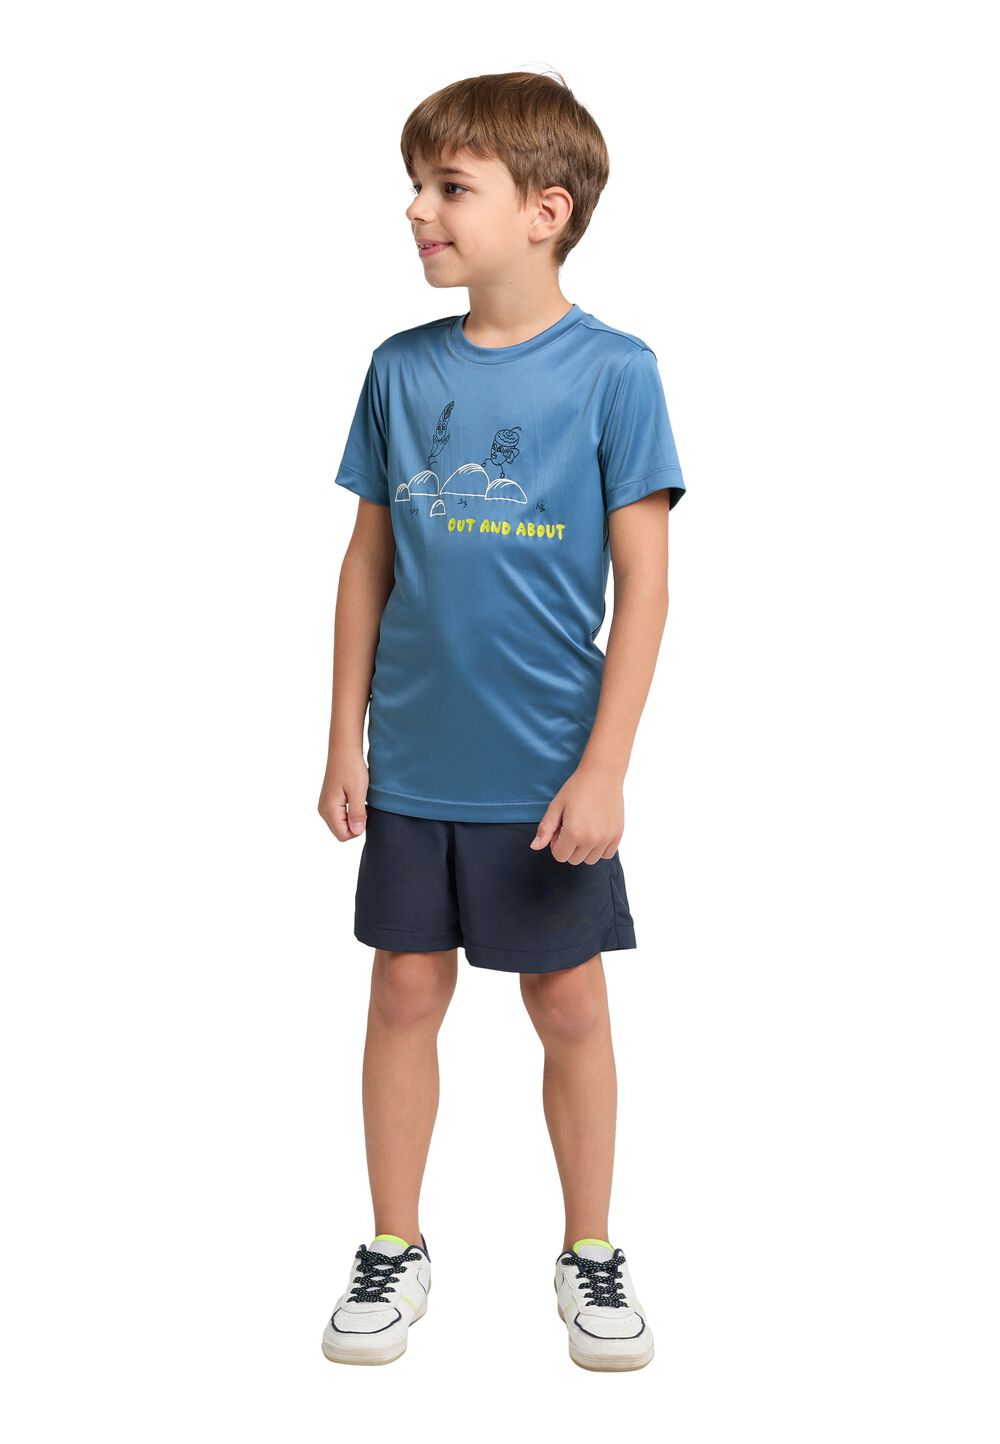 Jack Wolfskin OUT AND About T-Shirt Kids Functioneel shirt Kinderen 176 ele tal blue ele tal blue